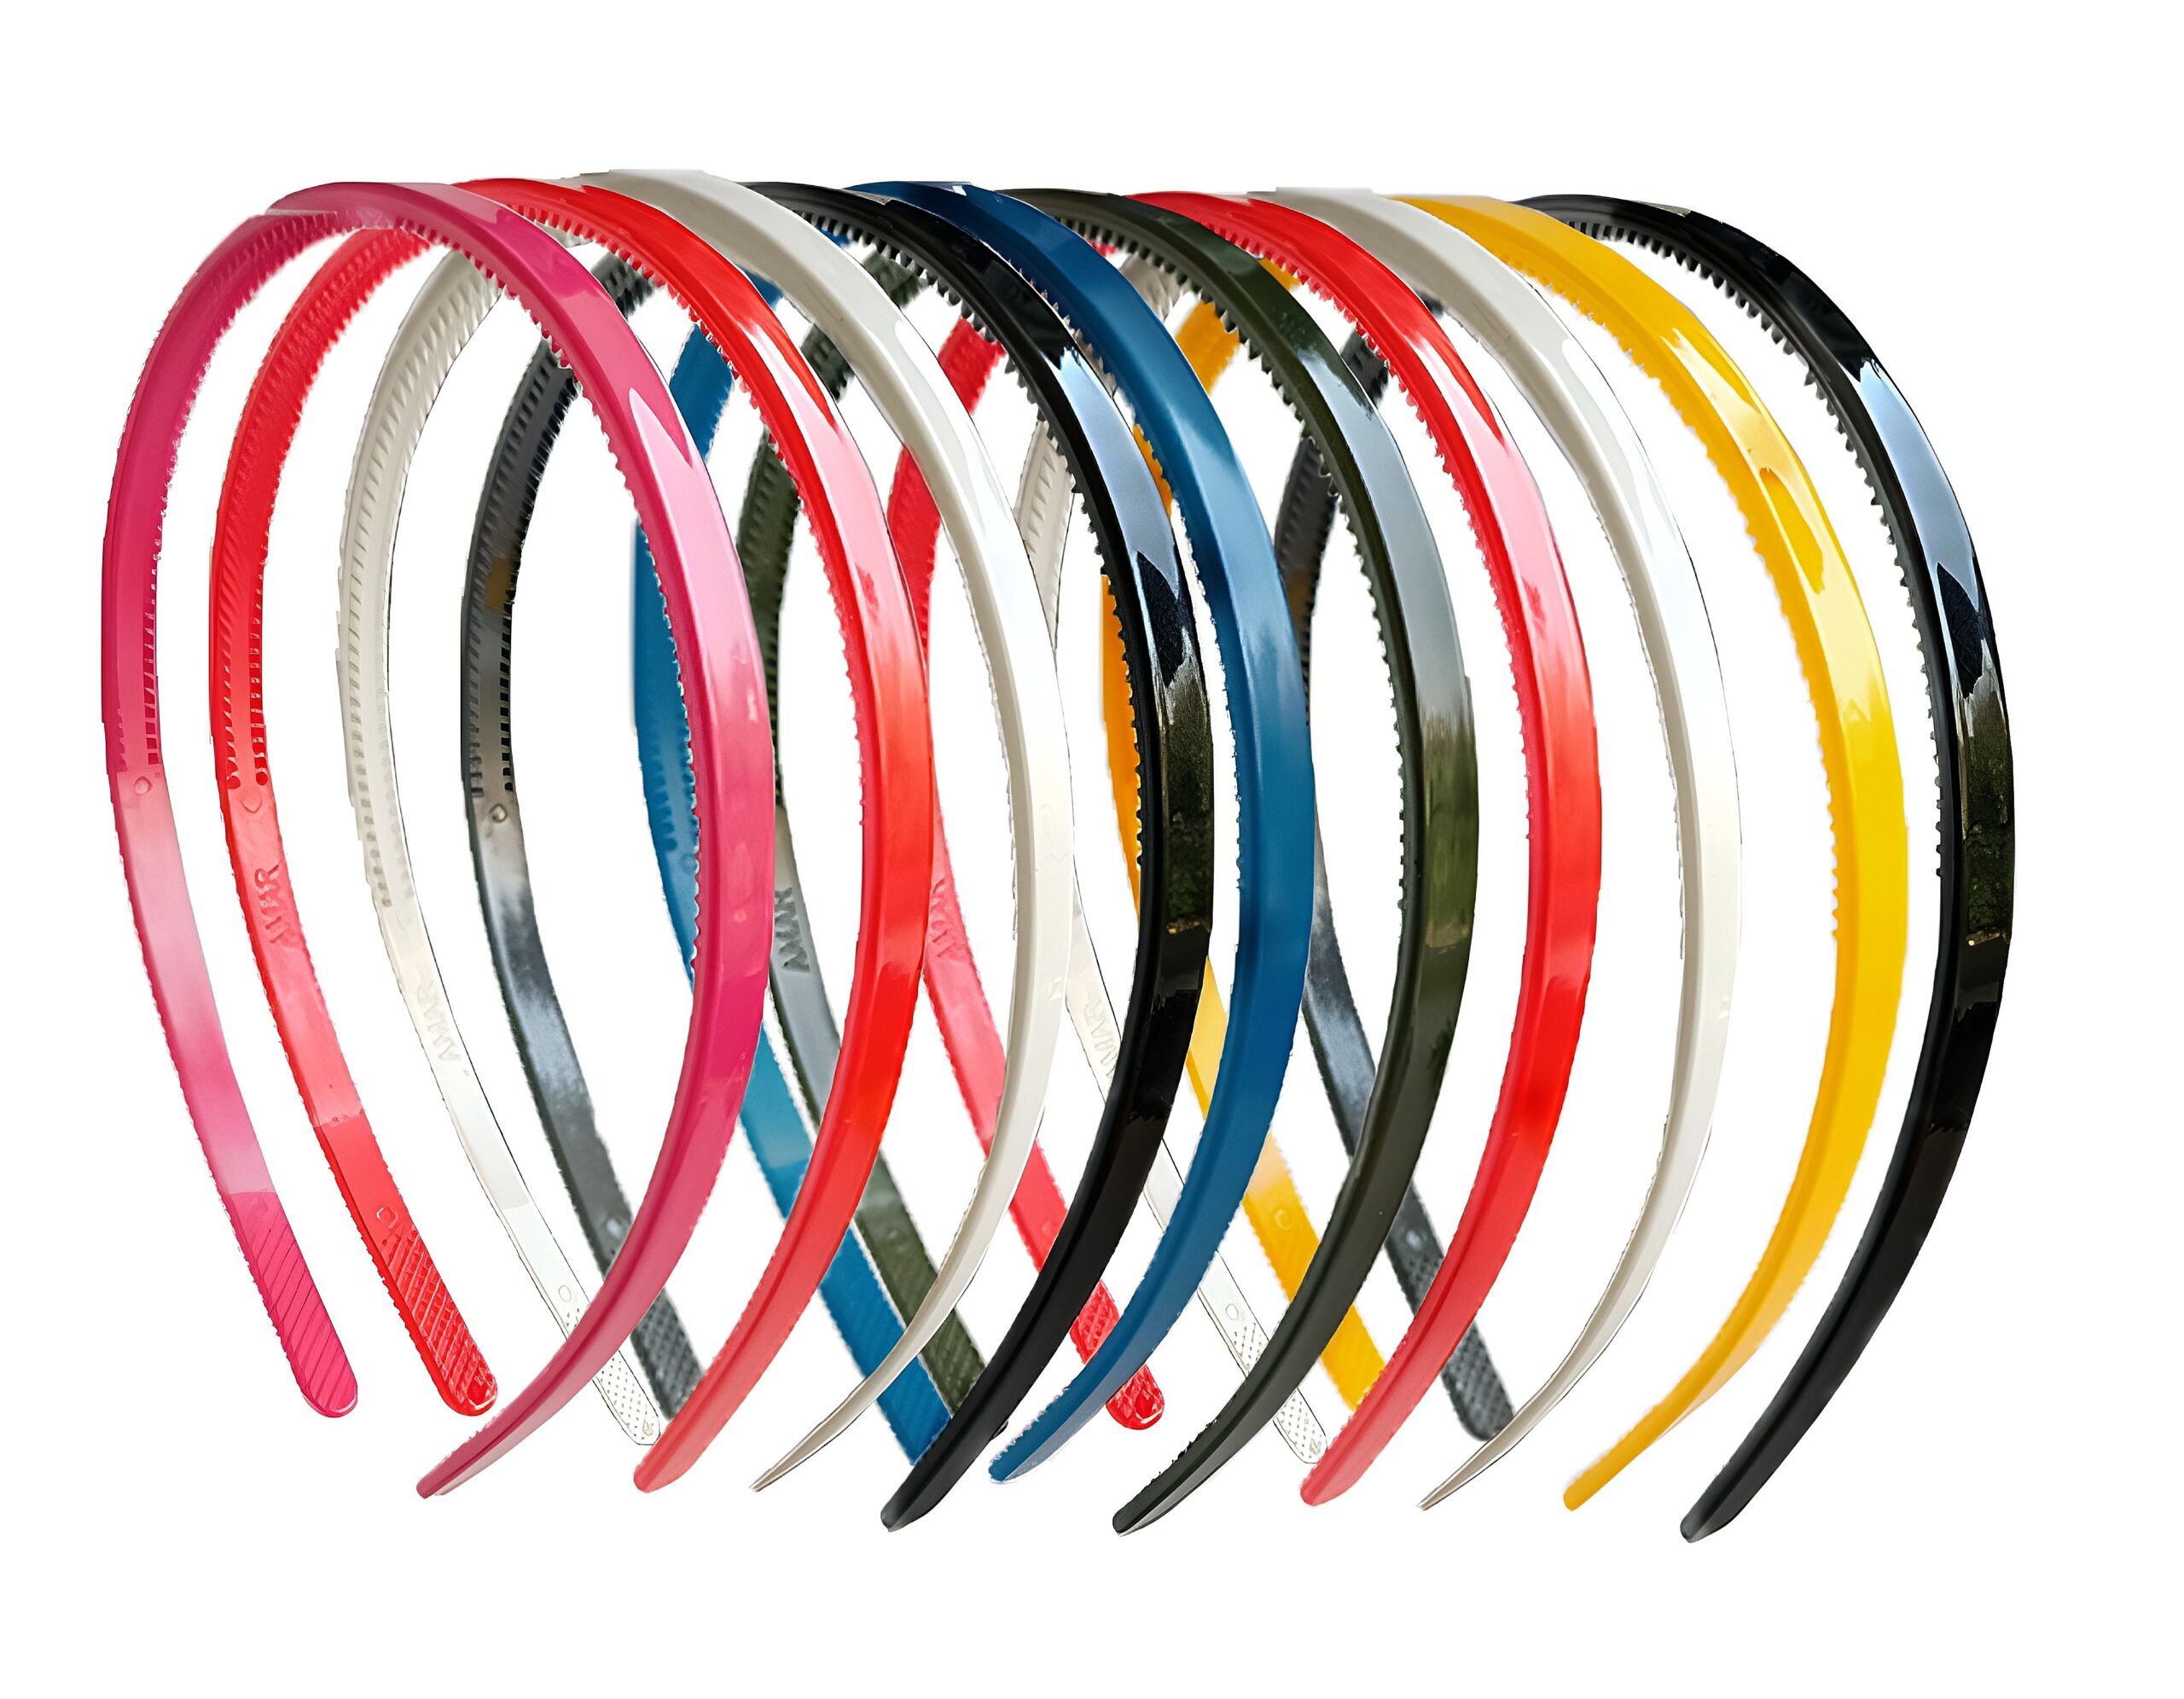 Wholesale Genya plastic spiral hair ties elastic hair bands phone cord  clear jelly hair coils wrist band bracelets From m.alibaba.com